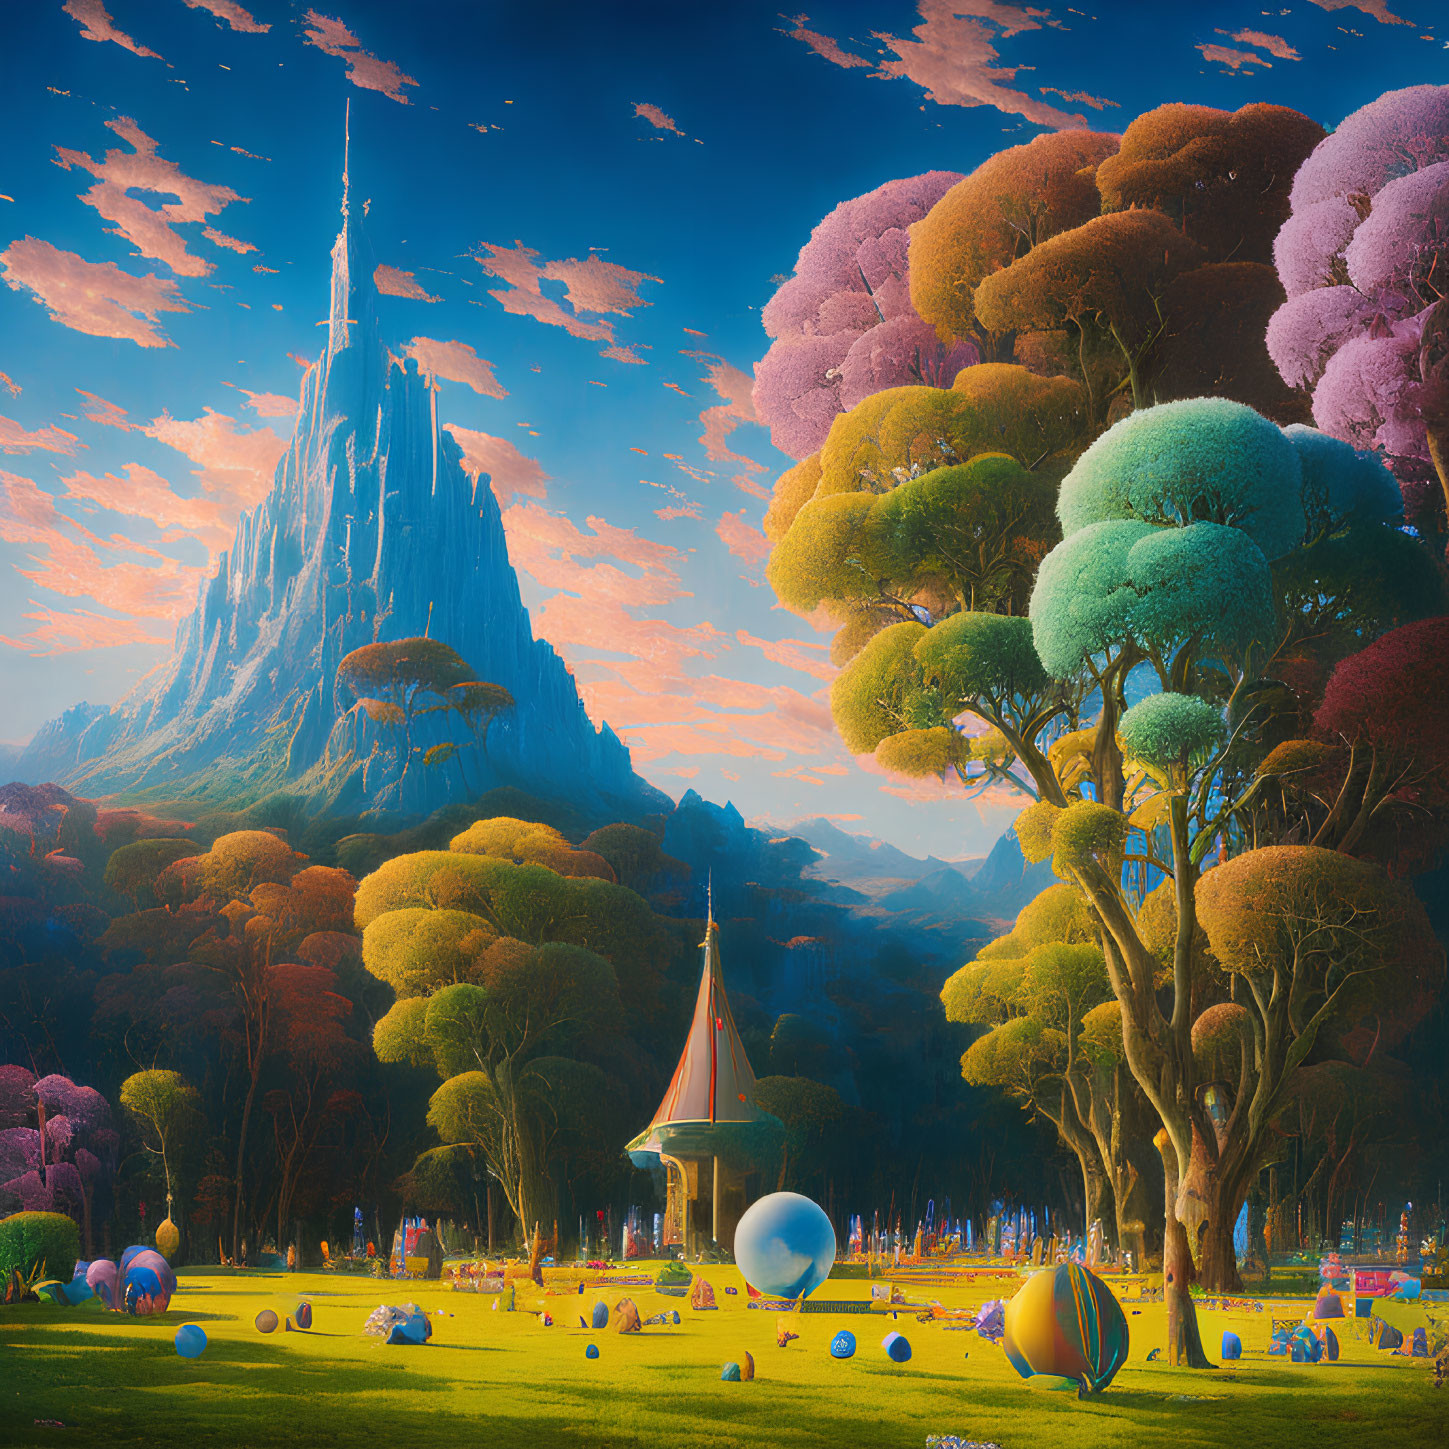 Colorful Fantasy Landscape with Whimsical Structures and Floating Orbs